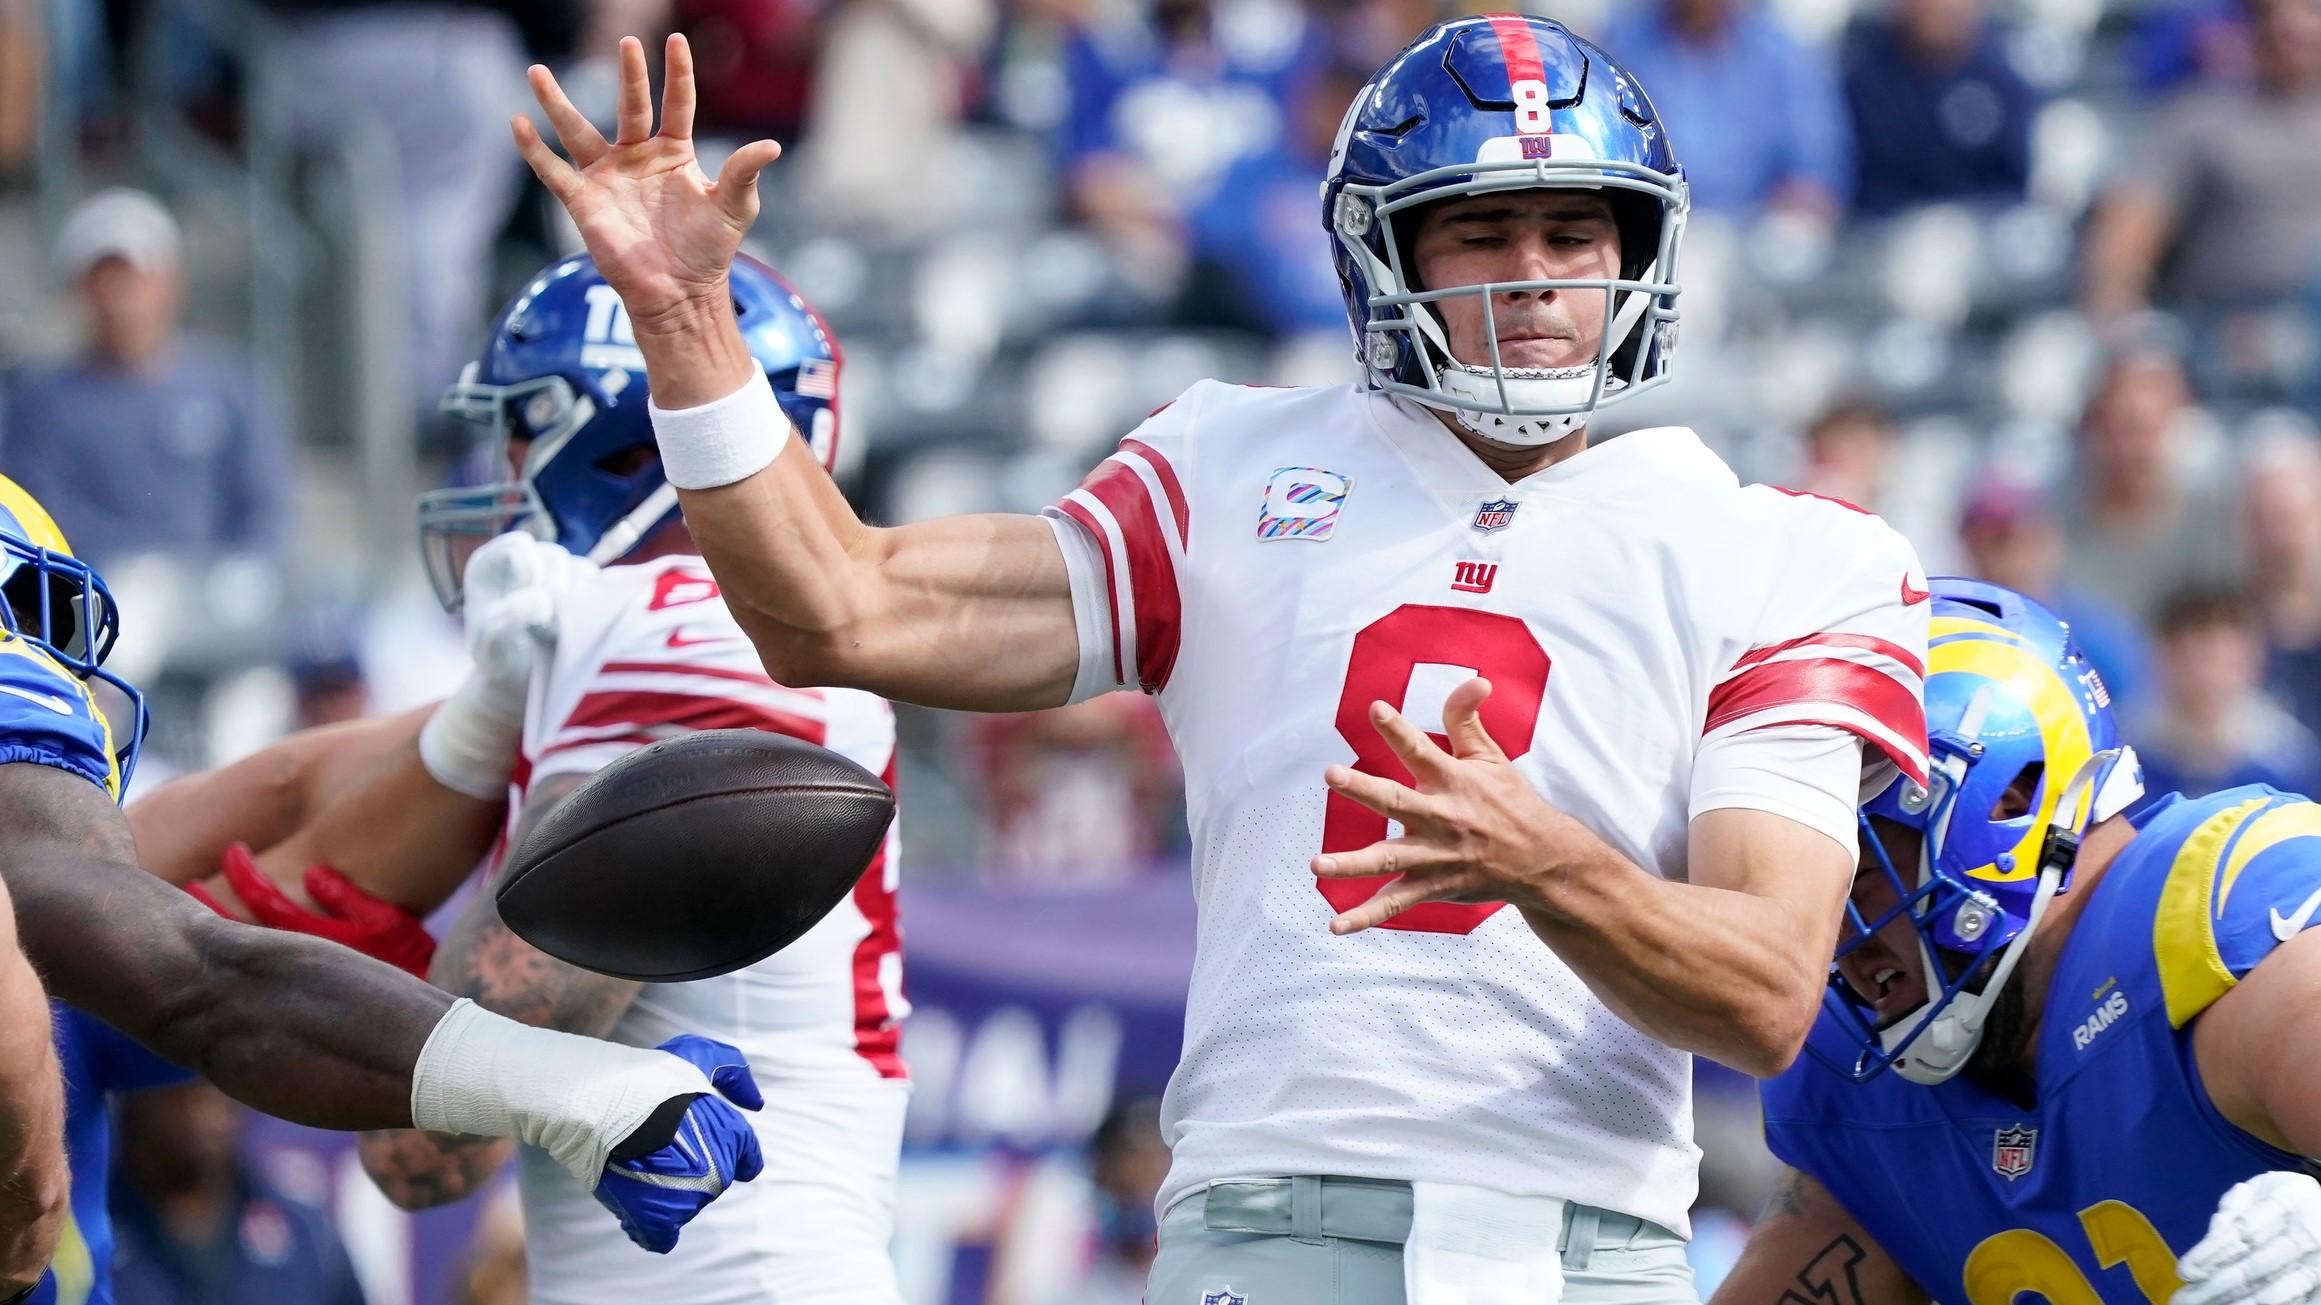 Oct 17, 2021; East Rutherford, New Jersey, USA; New York Giants quarterback Daniel Jones (8) is stripped of the ball in the 1st quarter against the Los Angeles Rams at MetLife Stadium. / Robert Deutsch-USA TODAY Sports